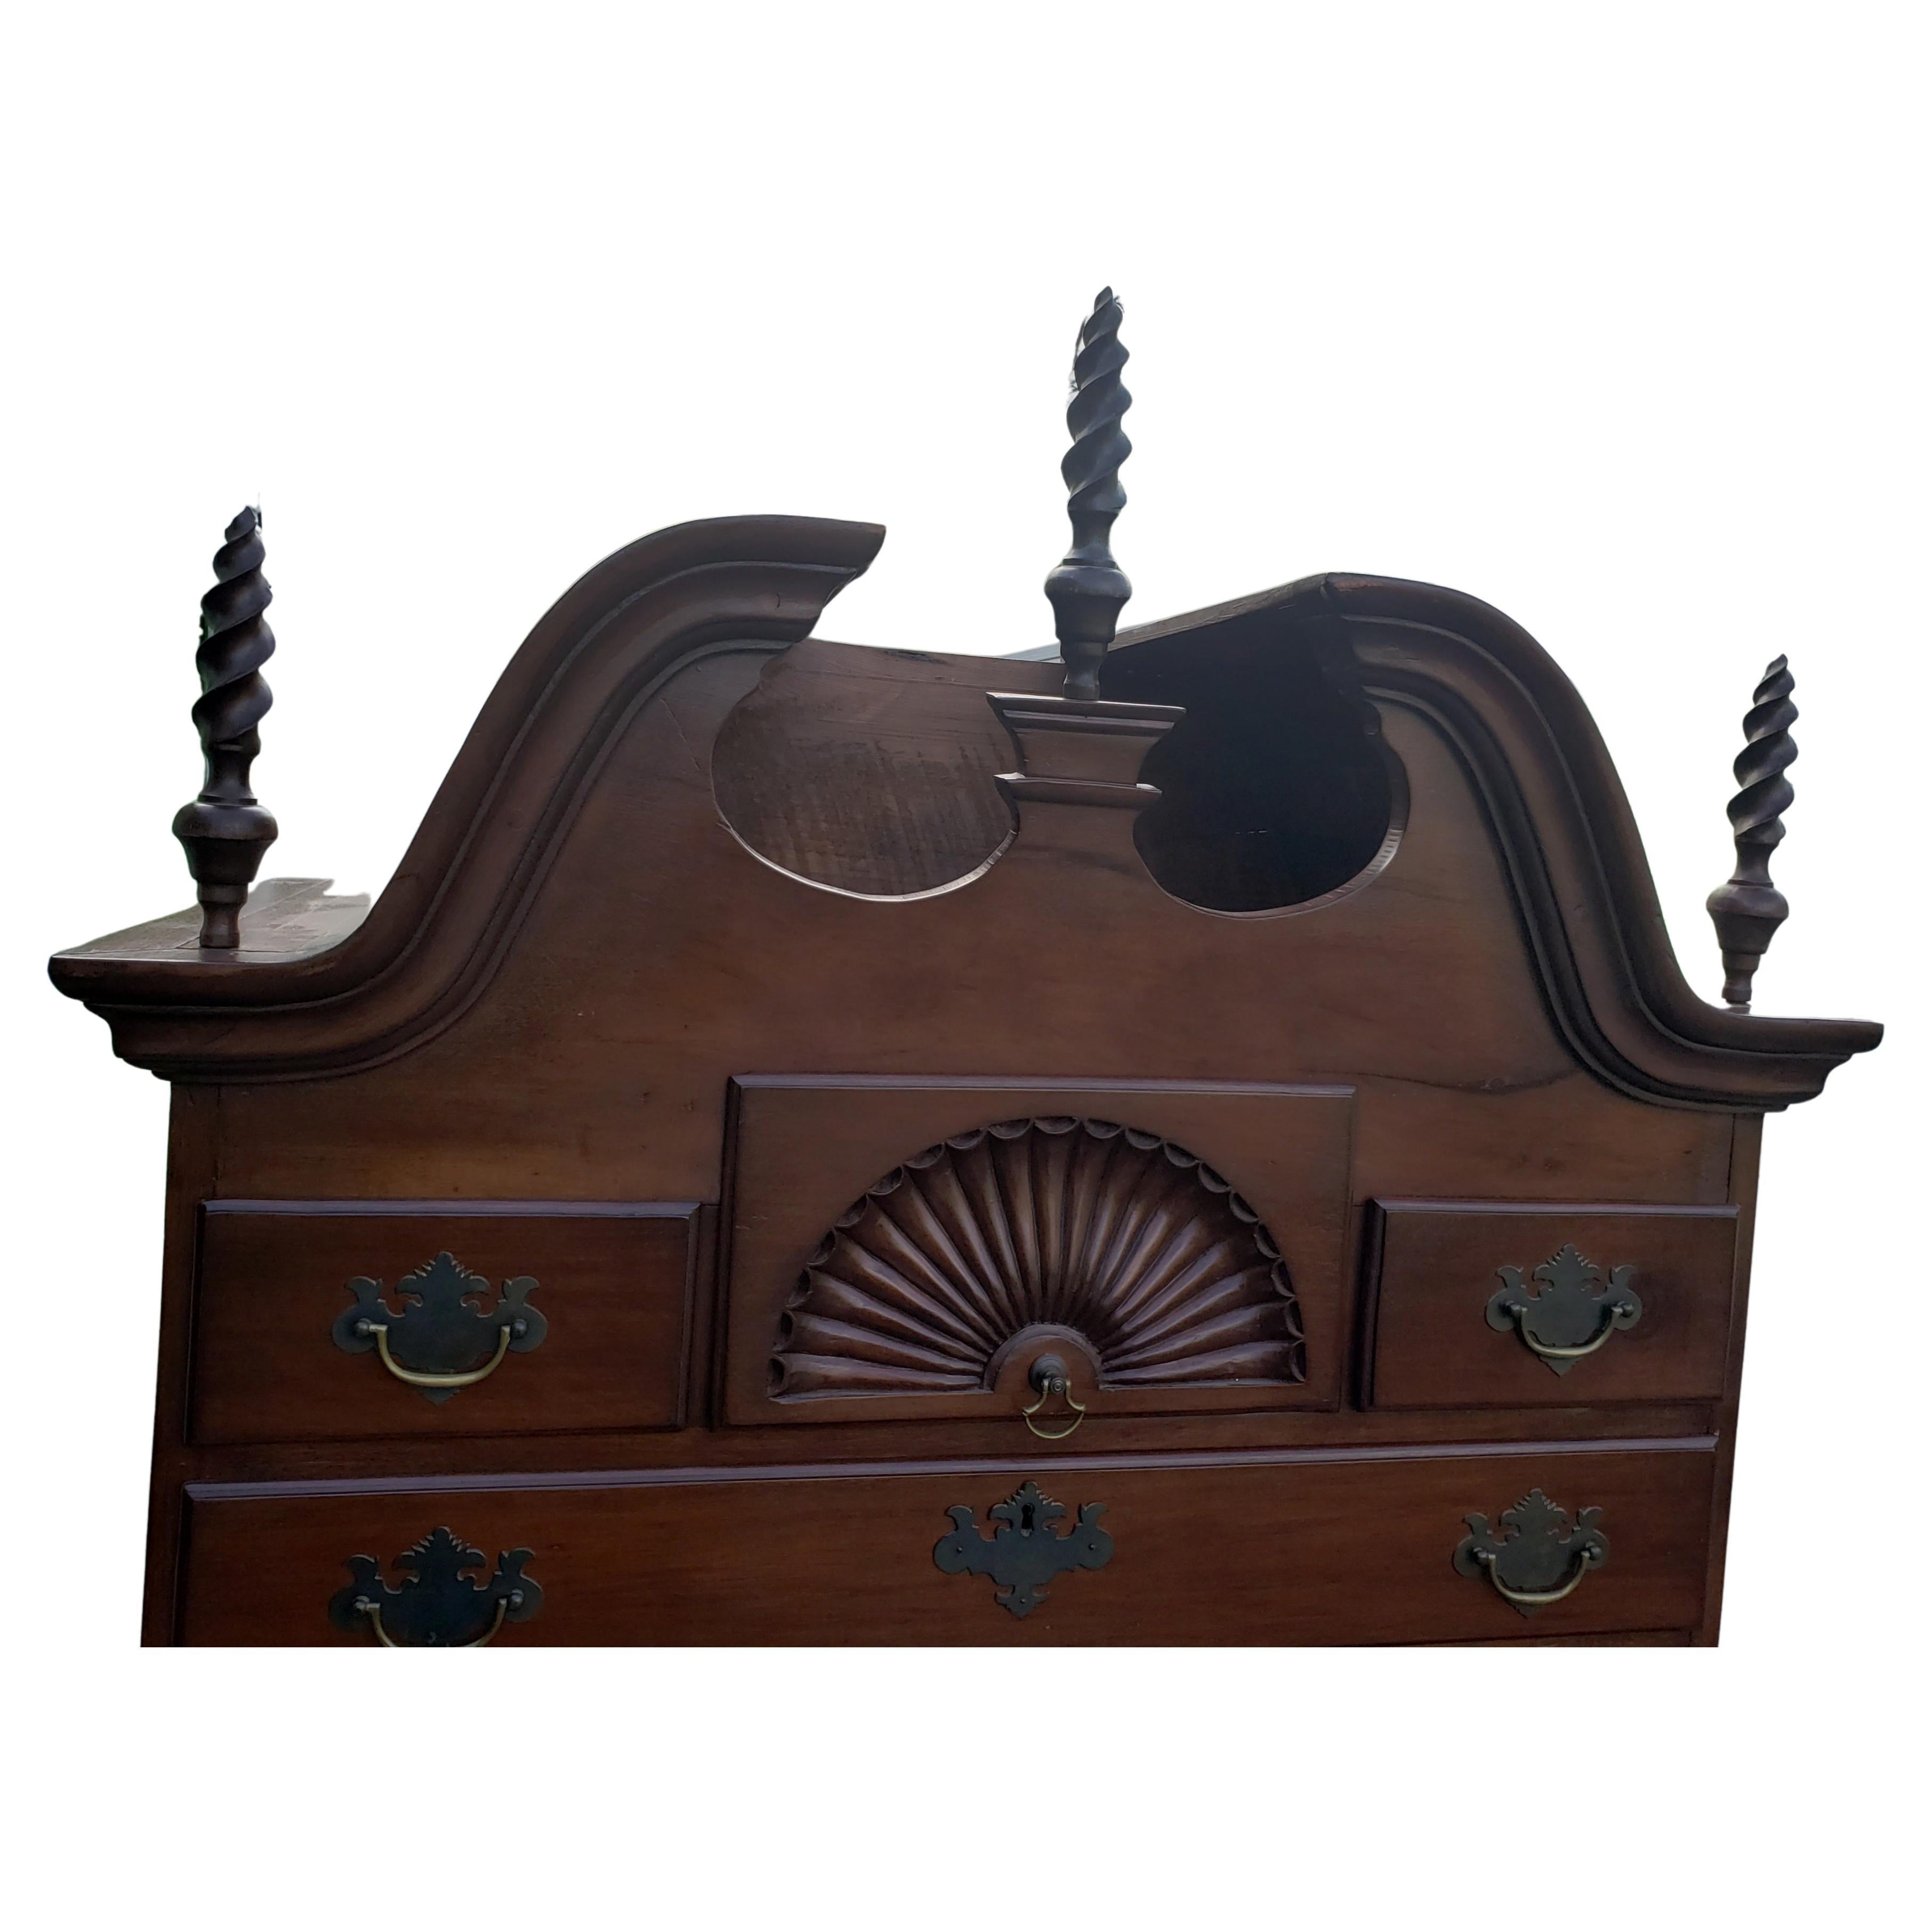 11-drawer William Savery Attributed Cherry Bonnet-Top High-Boy / Bureau, with Fine grained wood, Cabriole legs with fine barley twist finials. Attributed to William Savery, circa 1750s. This gem comes with a keyed locking drawers in great working